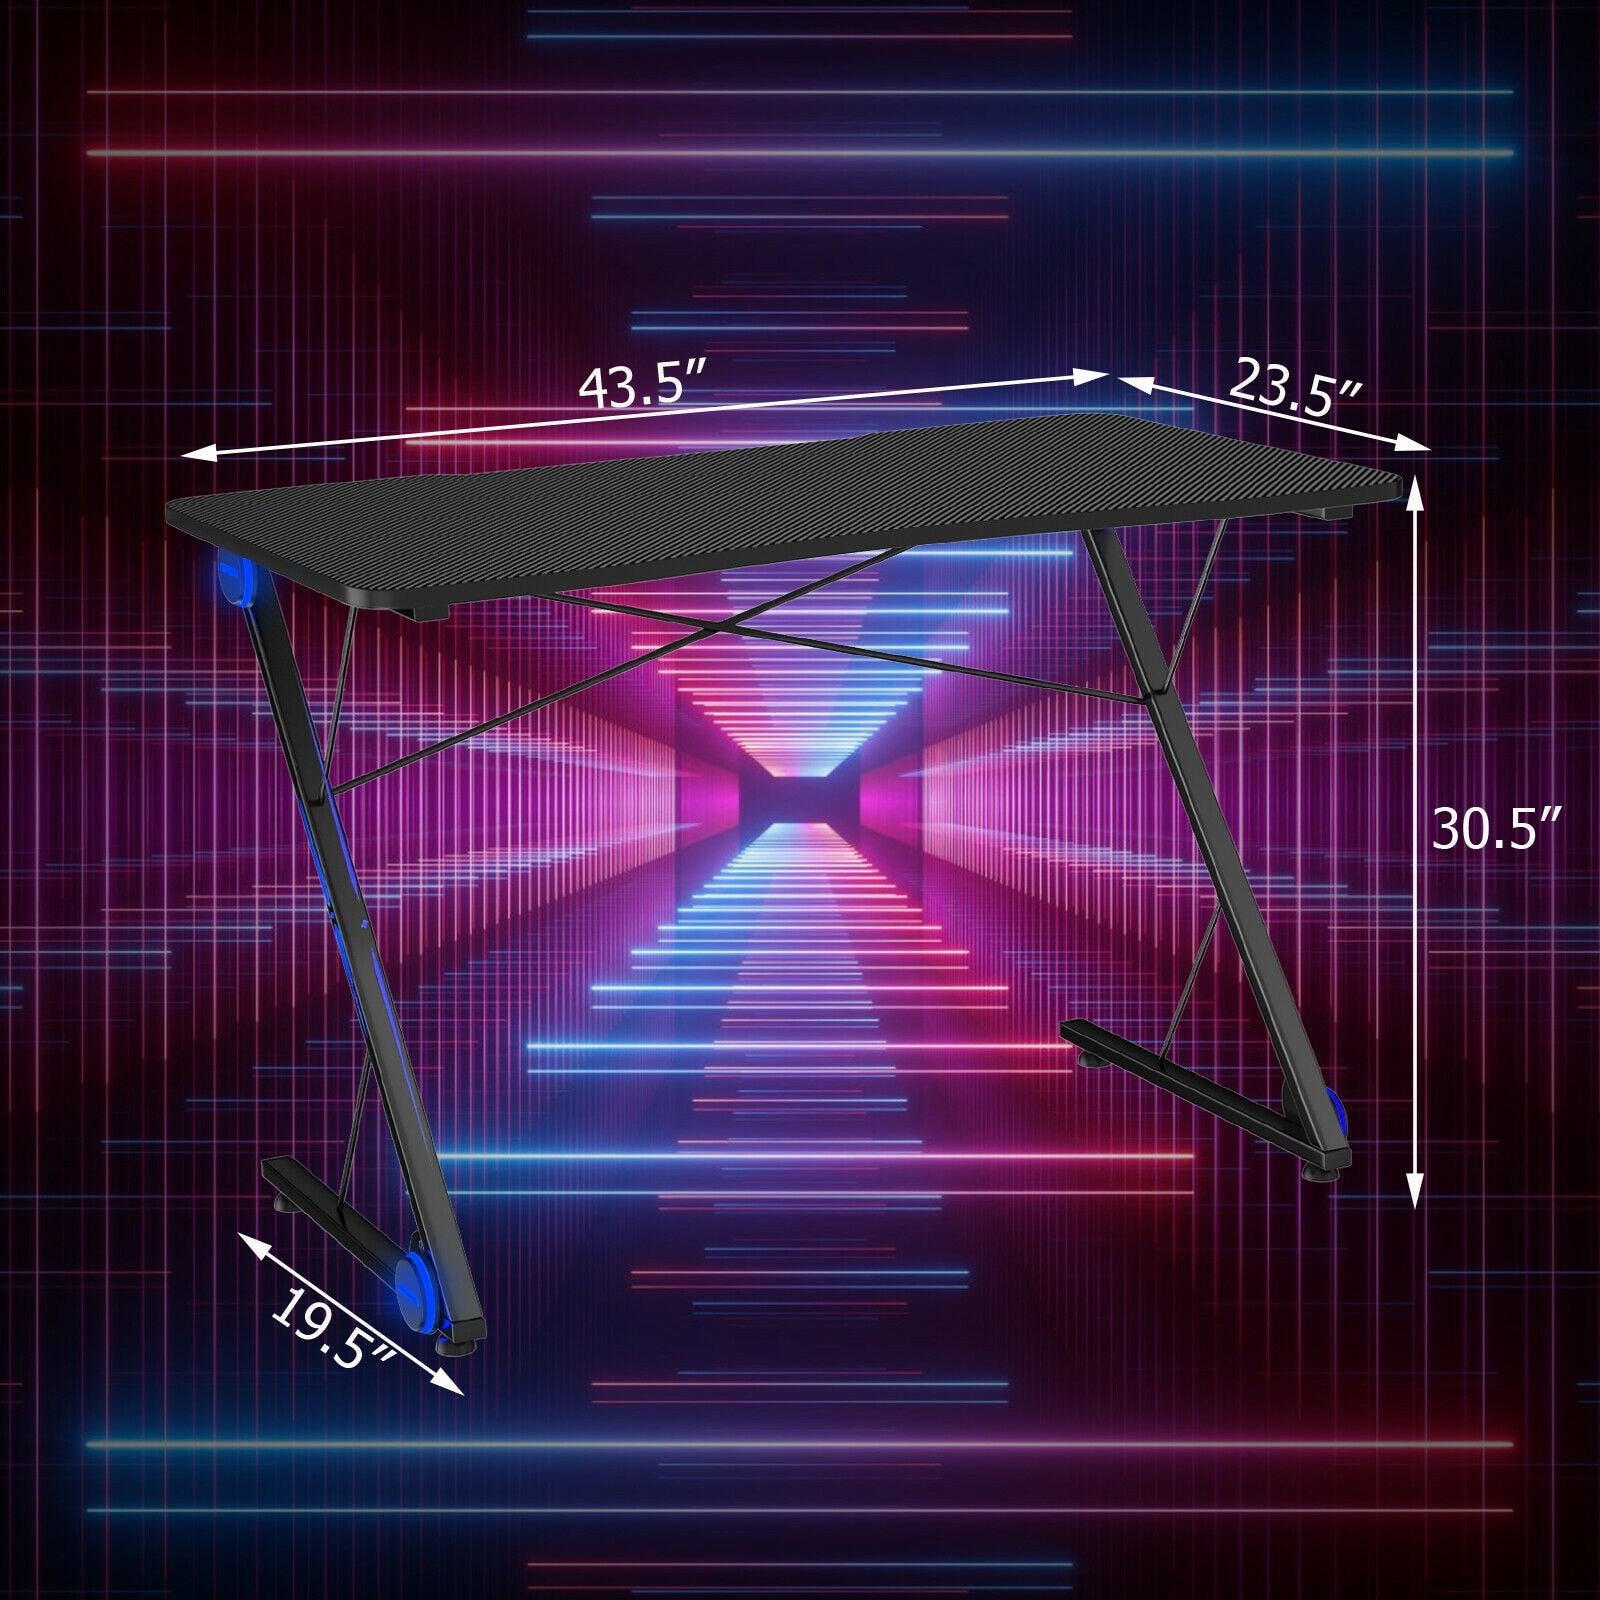 Z Shape Gaming Desk with LED Lights at Gallery Canada